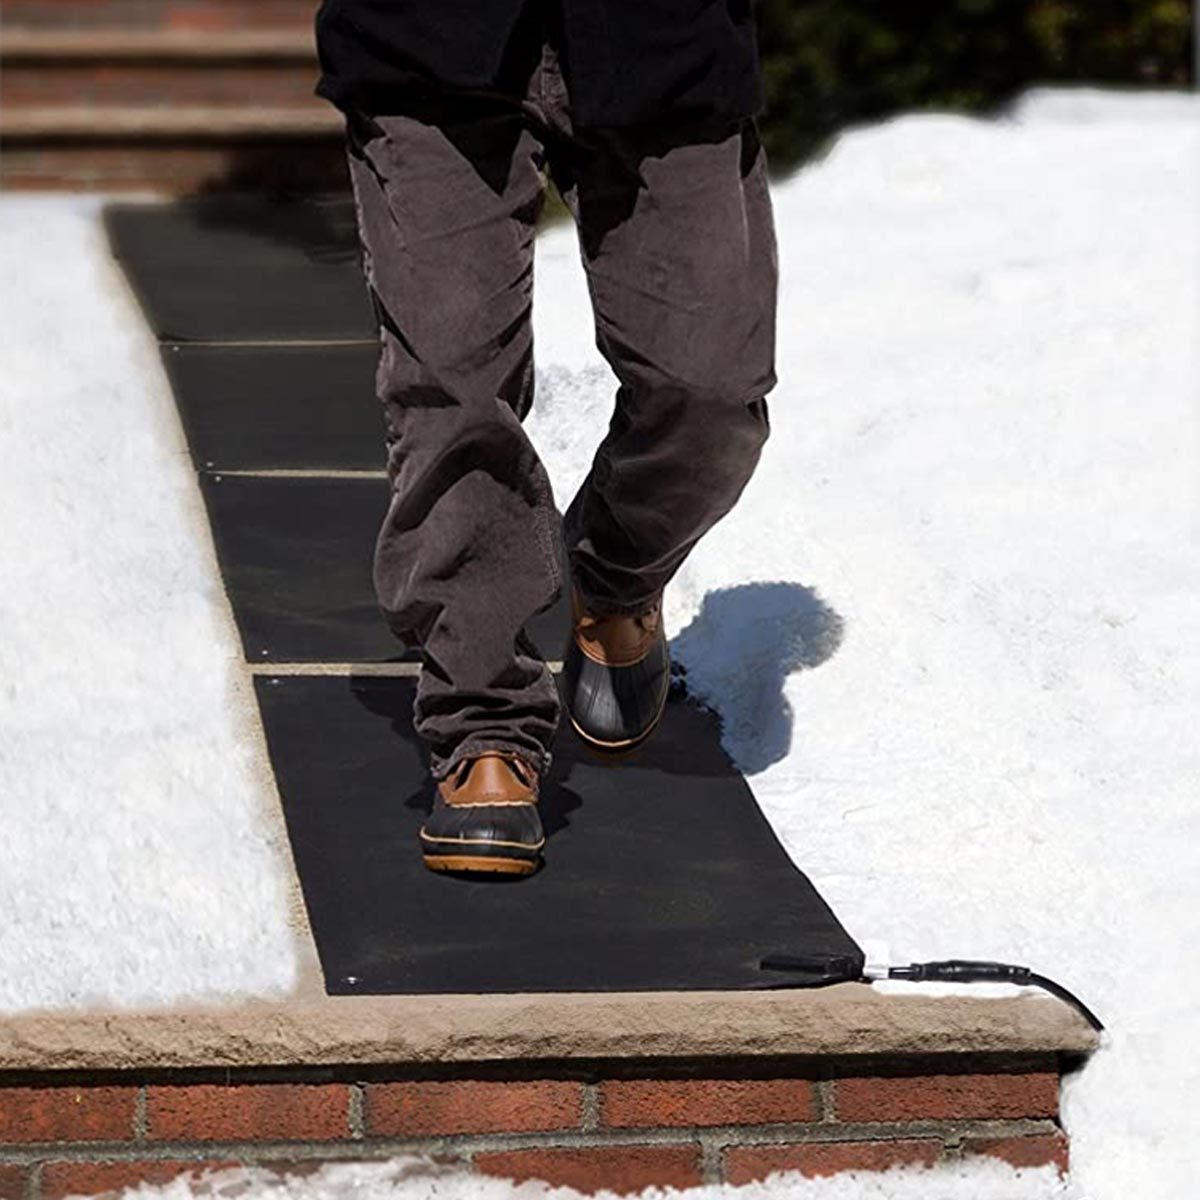 https://www.familyhandyman.com/wp-content/uploads/2023/01/Best-Heated-Outdoor-Mats-That-Melt-Snow-and-Ice_FT_via-amazon.jpg?fit=700%2C700